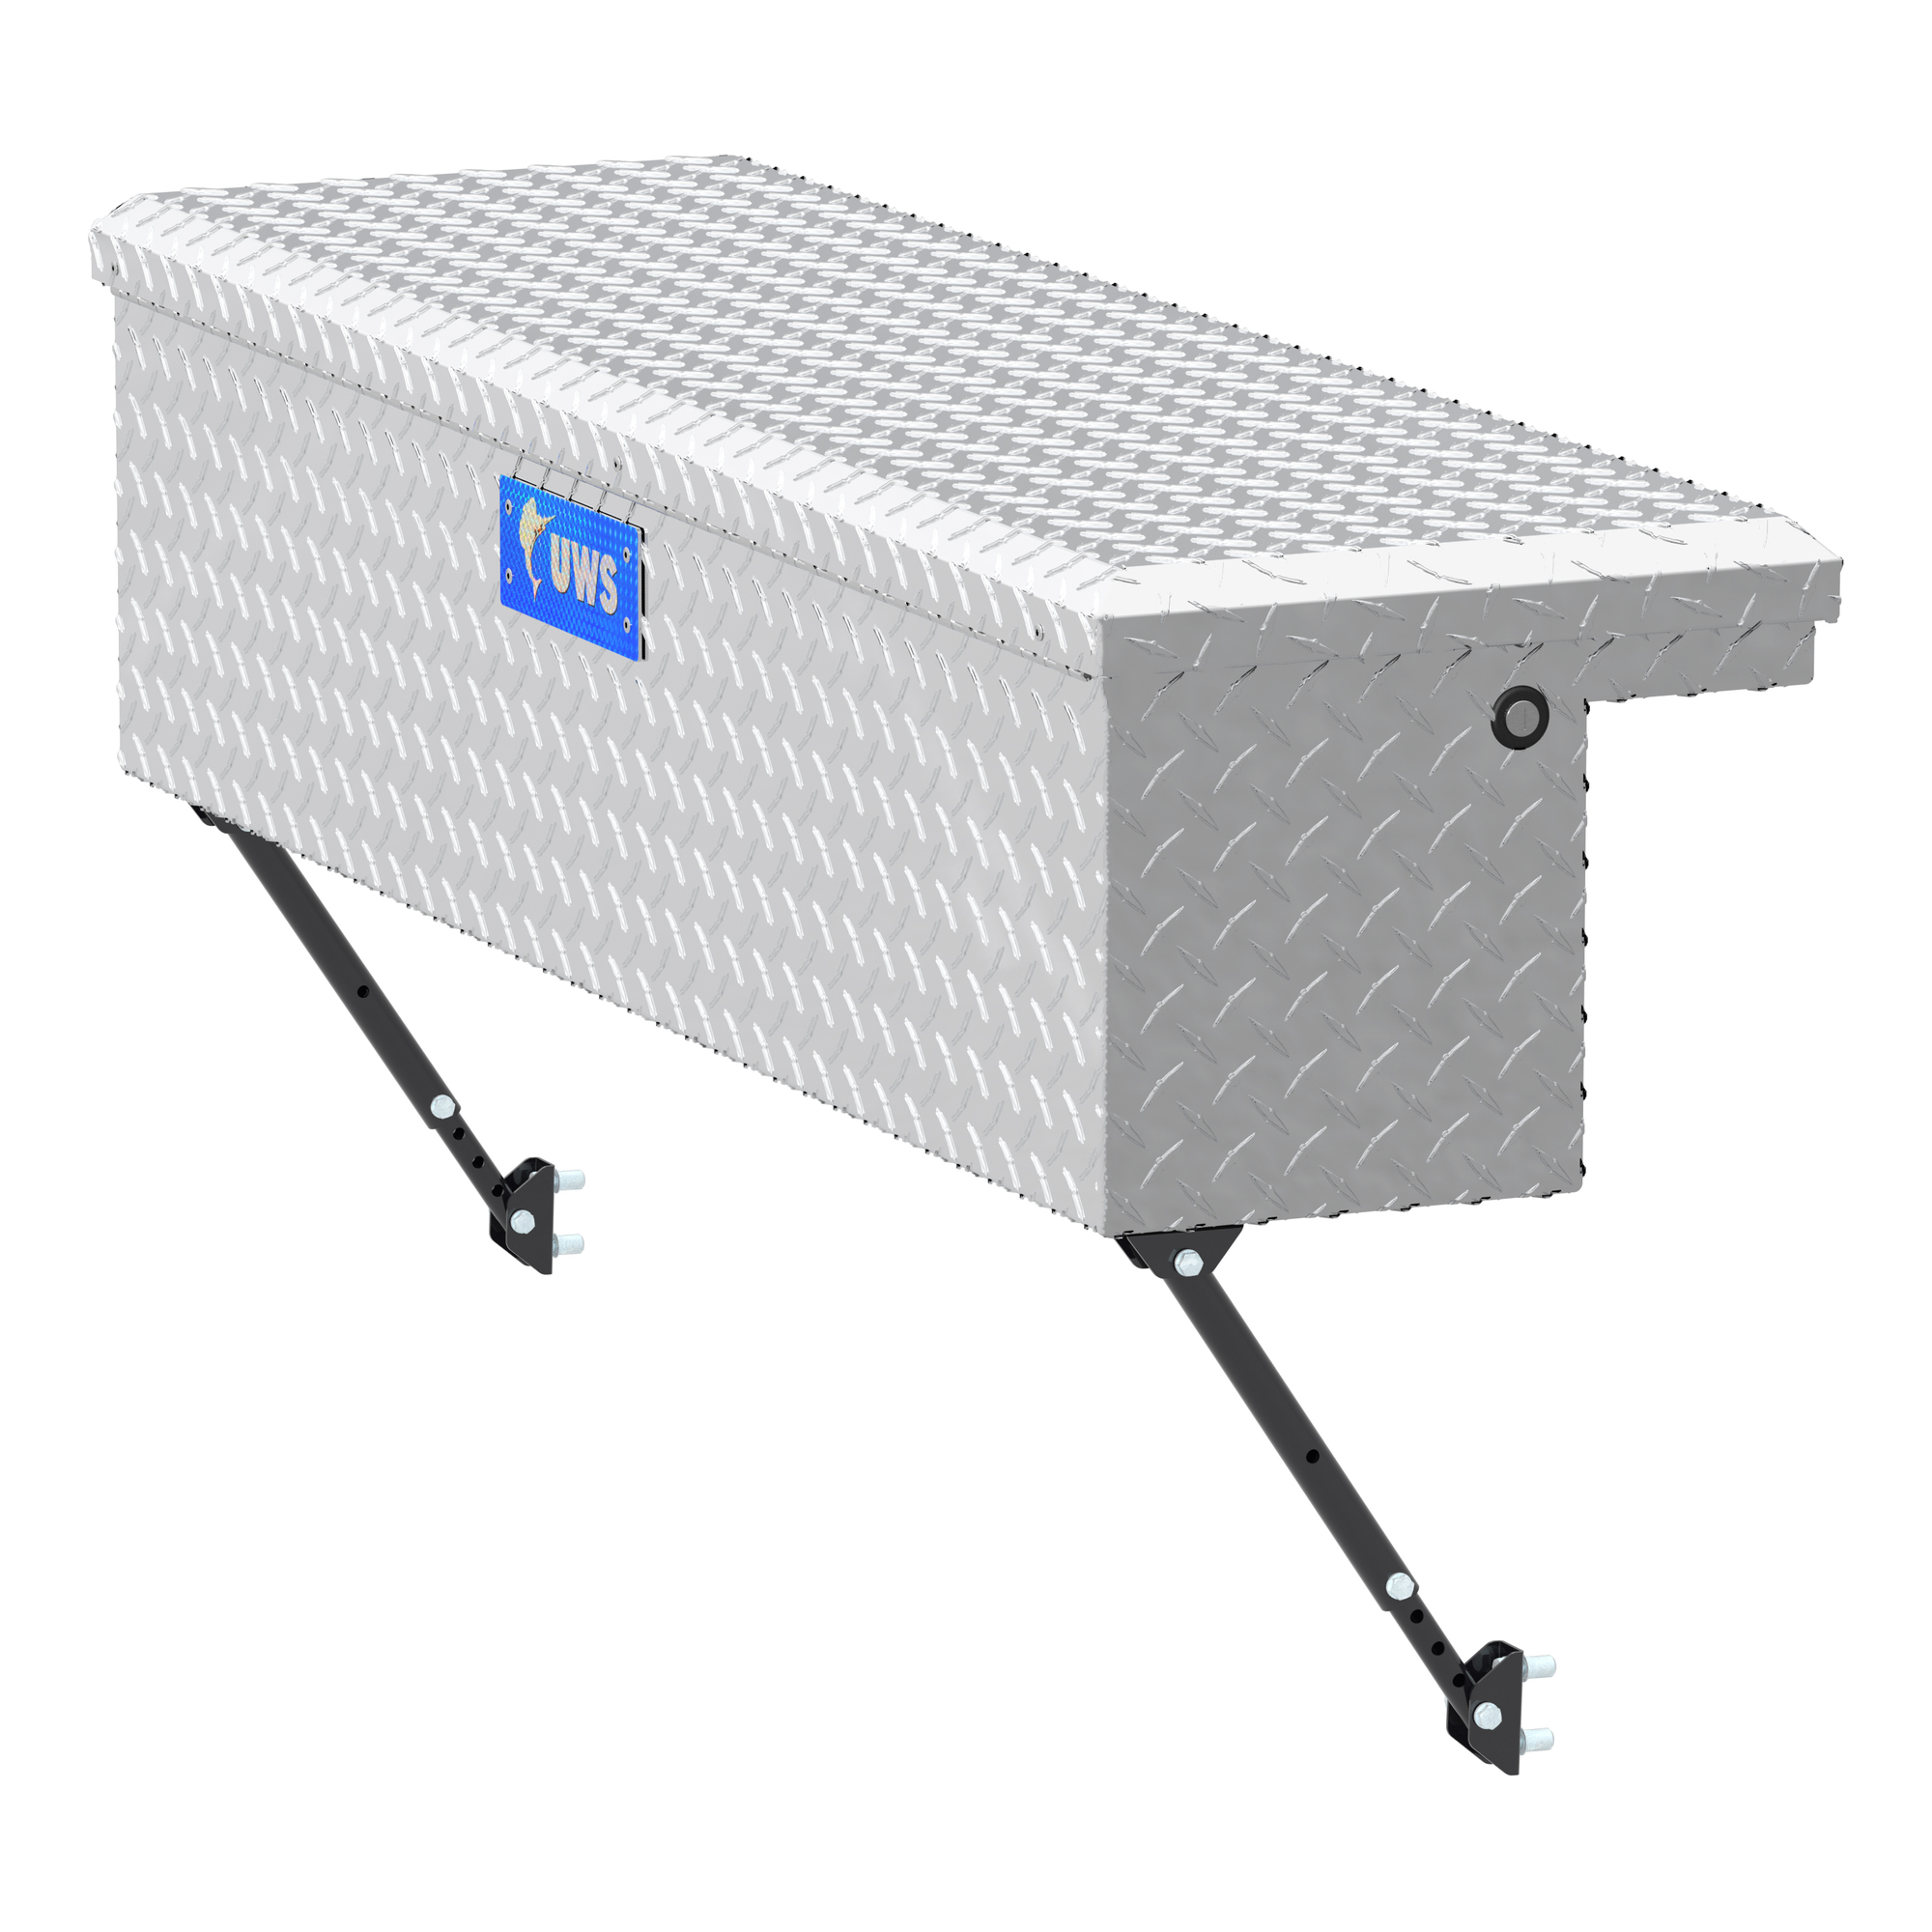 UWS, 48Inch Truck Side Tool Box with Low Profile, Width 48.875 in, Material Aluminum, Color Finish Bright Aluminum, Model EC30201-MK2